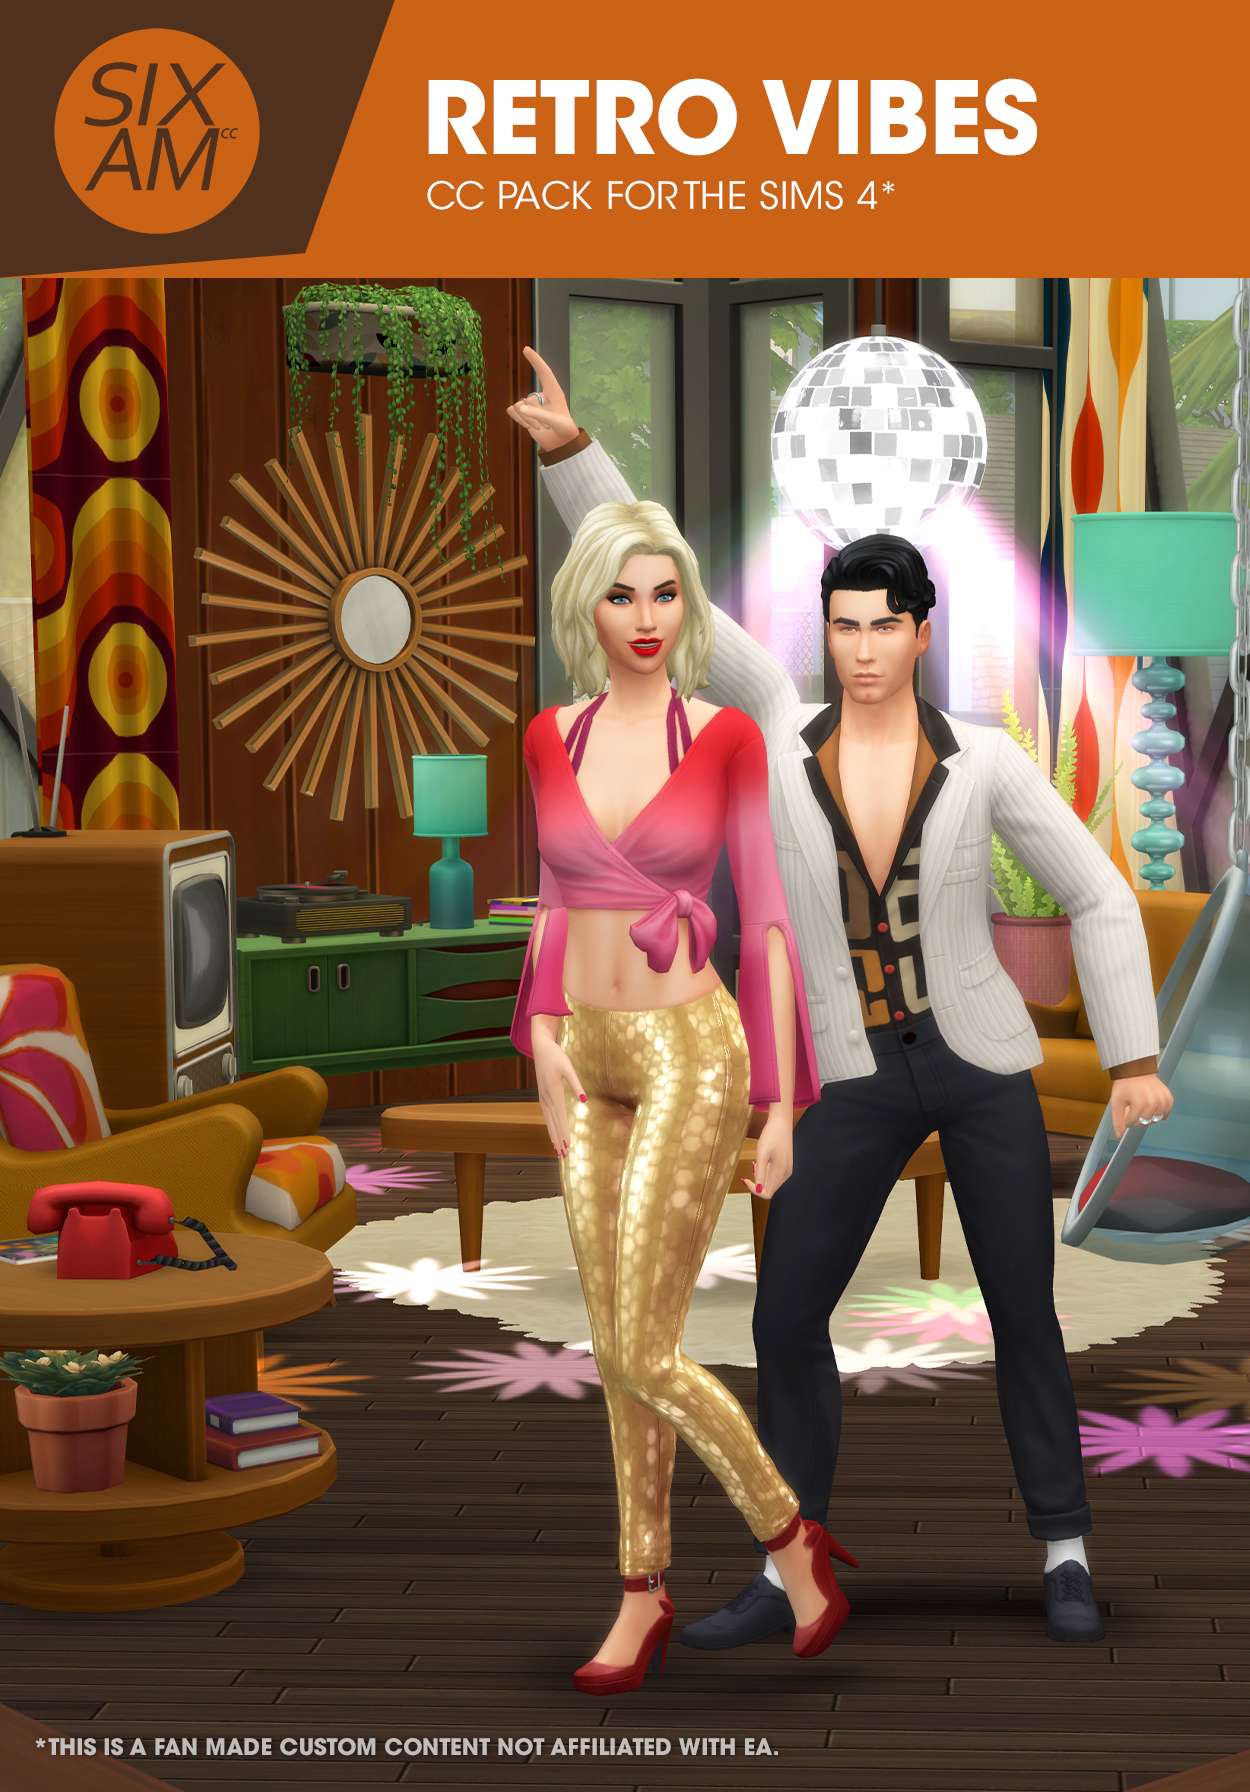 Retro Vibes CC Pack - The Sims 4 Build / Buy - CurseForge